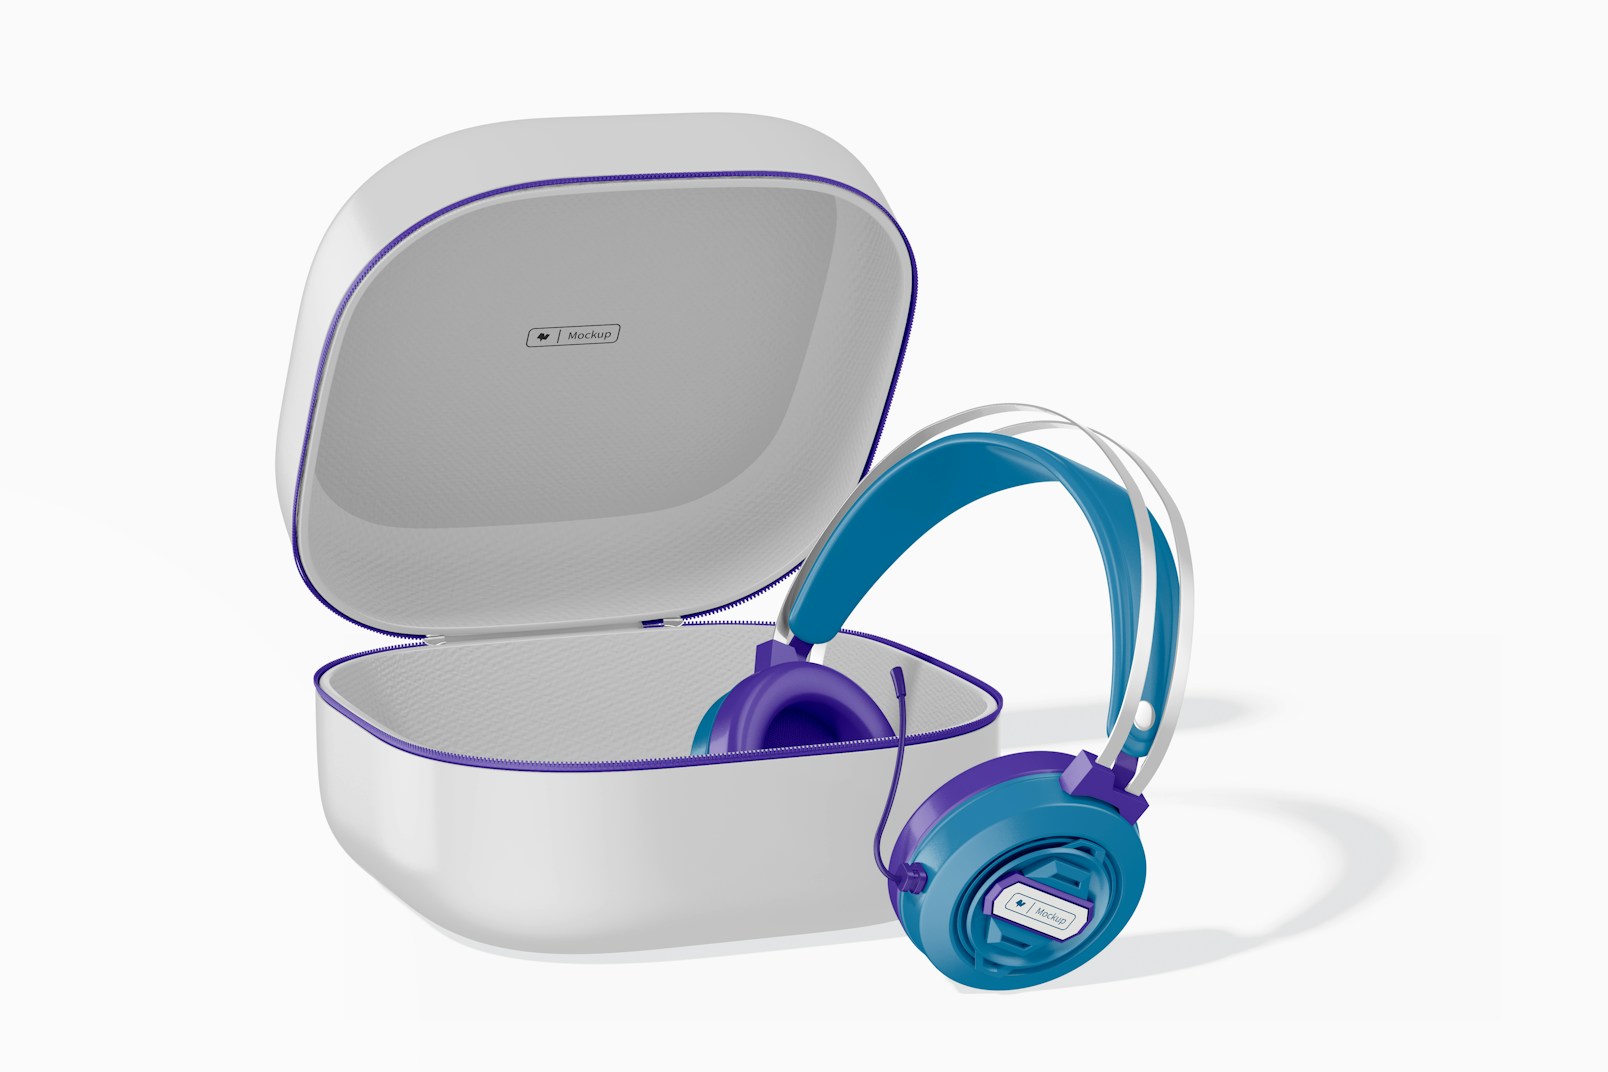 Headphones with Case Mockup, Floating